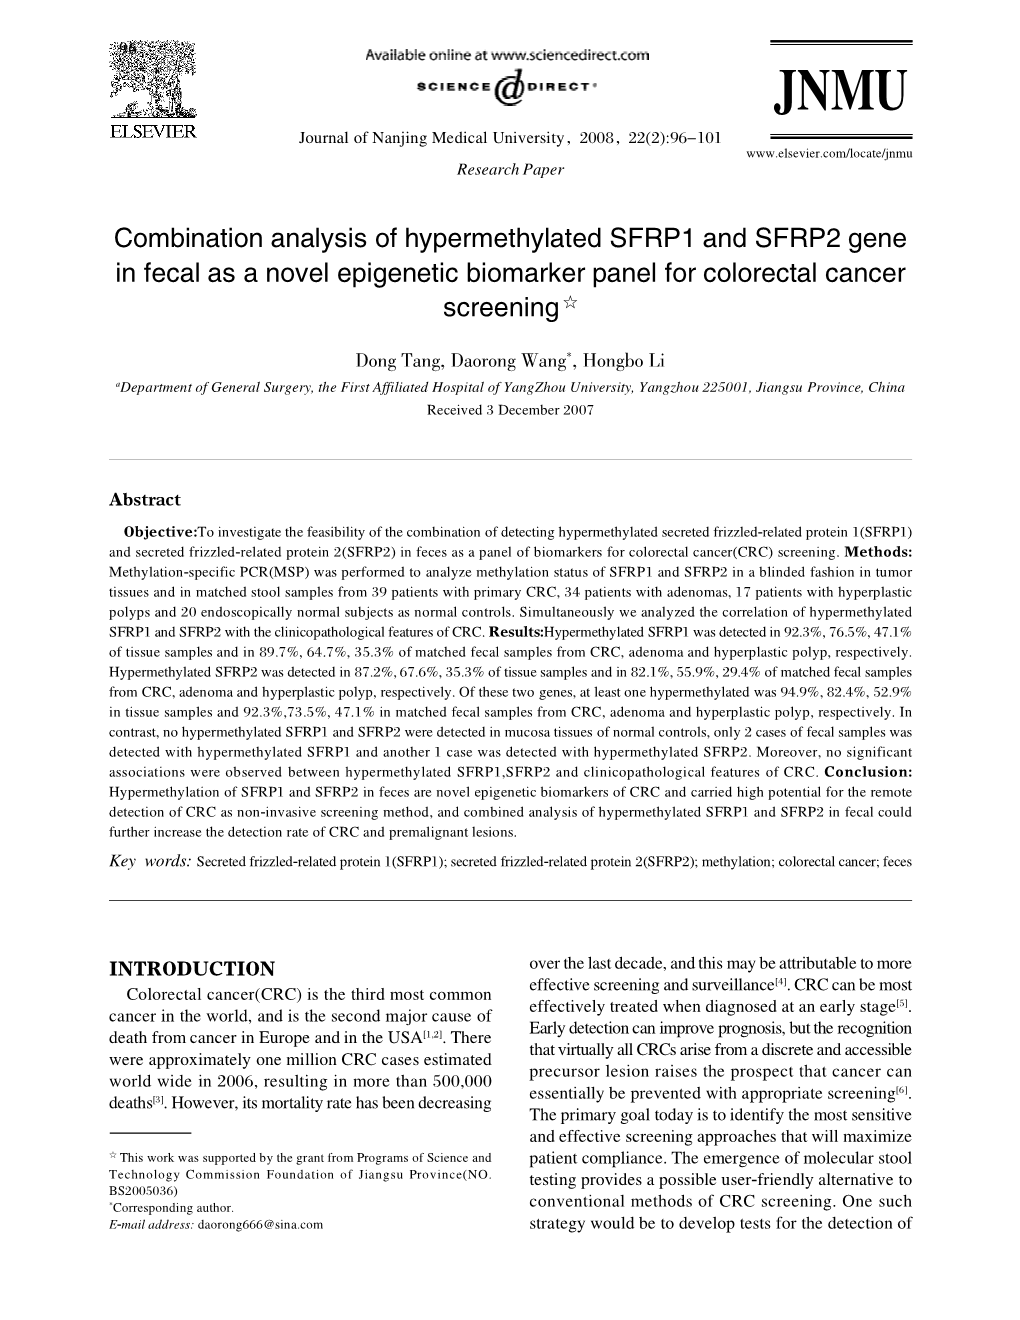 Combination Analysis of Hypermethylated SFRP1 and SFRP2 Gene in Fecal As a Novel Epigenetic Biomarker Panel for Colorectal Cancer Screening ☆